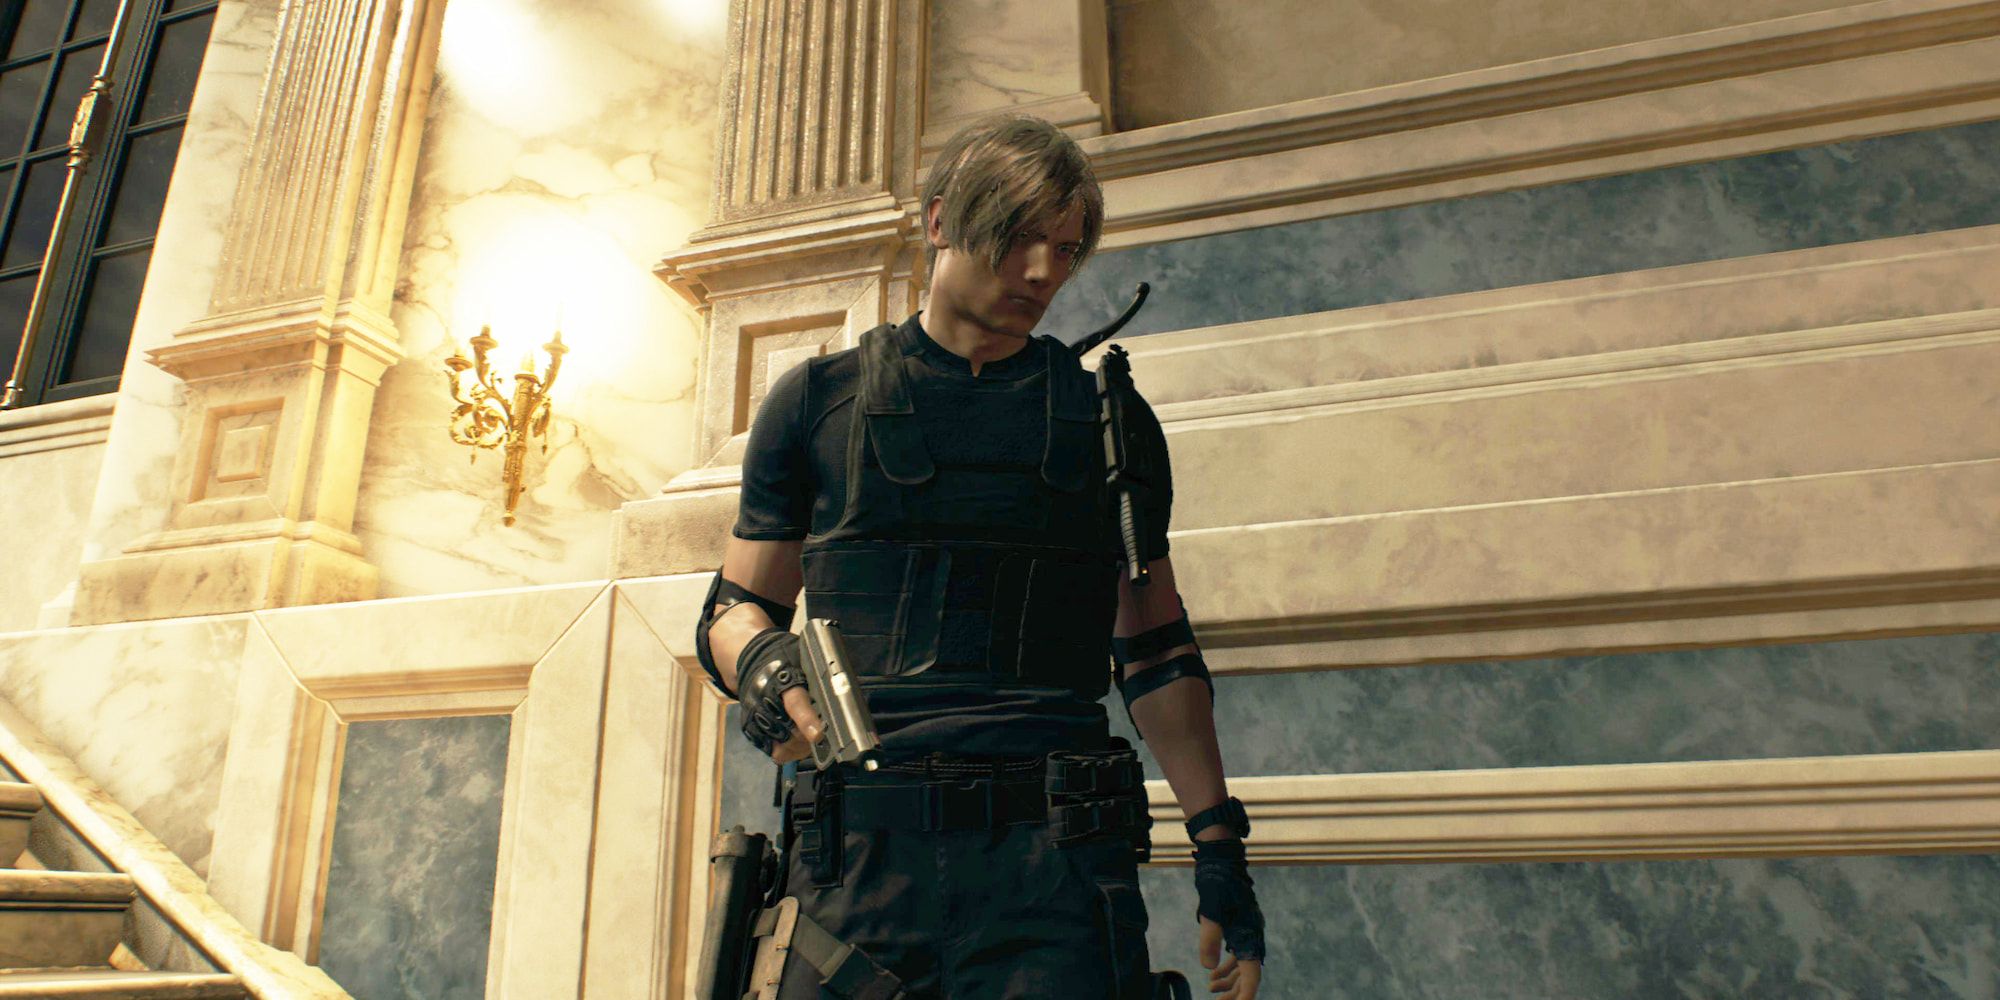 How to get the Punisher in the Resident Evil 4 remake